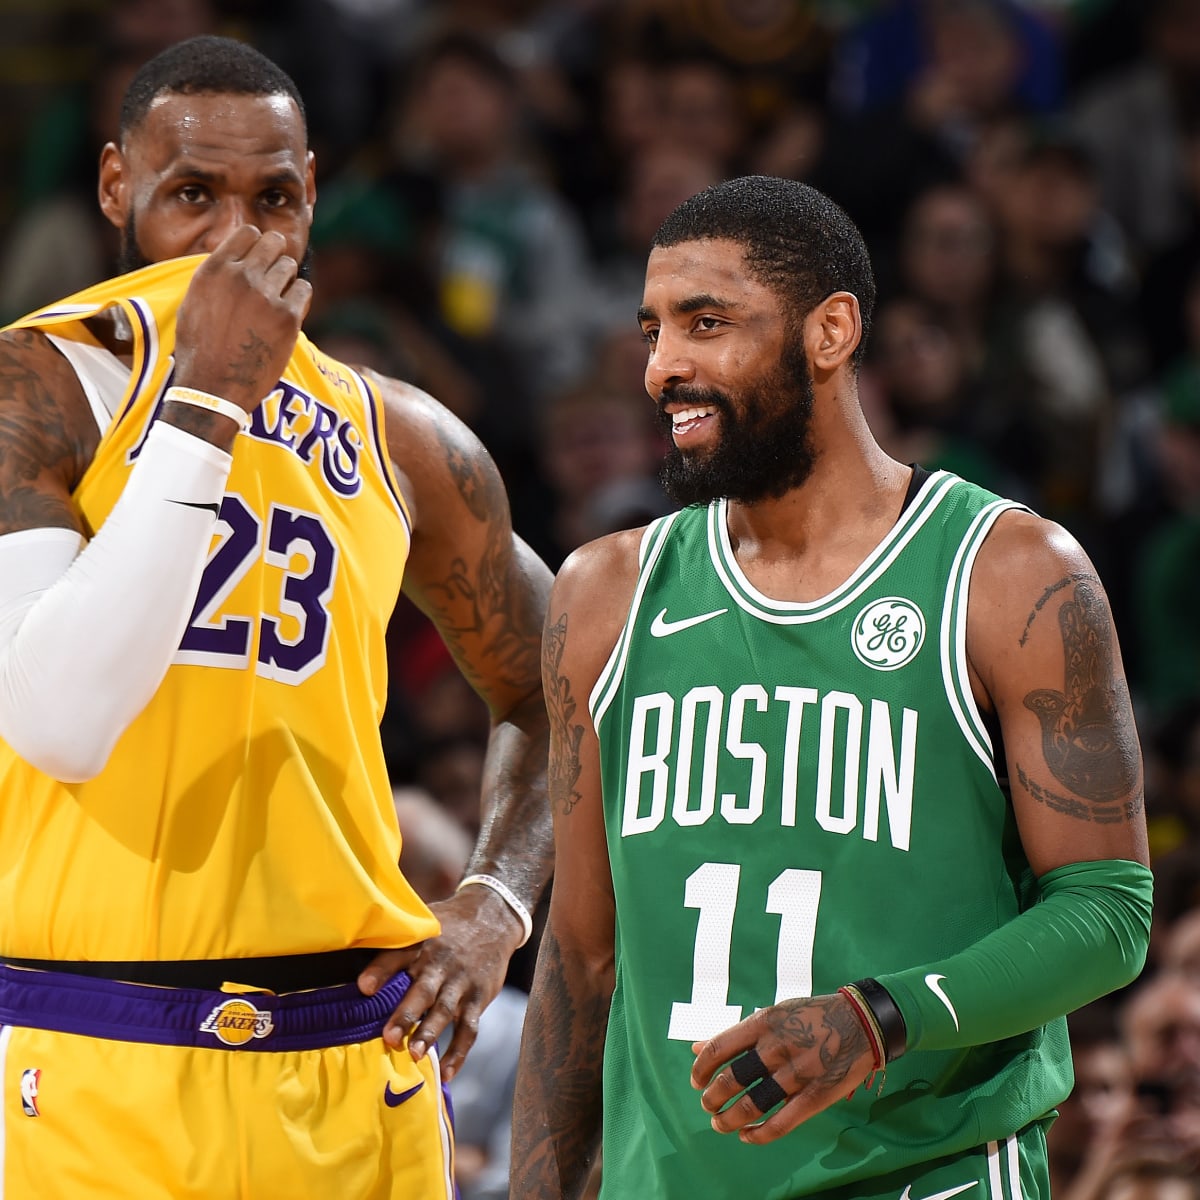 LeBron James says Kyrie Irving's comments about Kevin Durant 'hurt